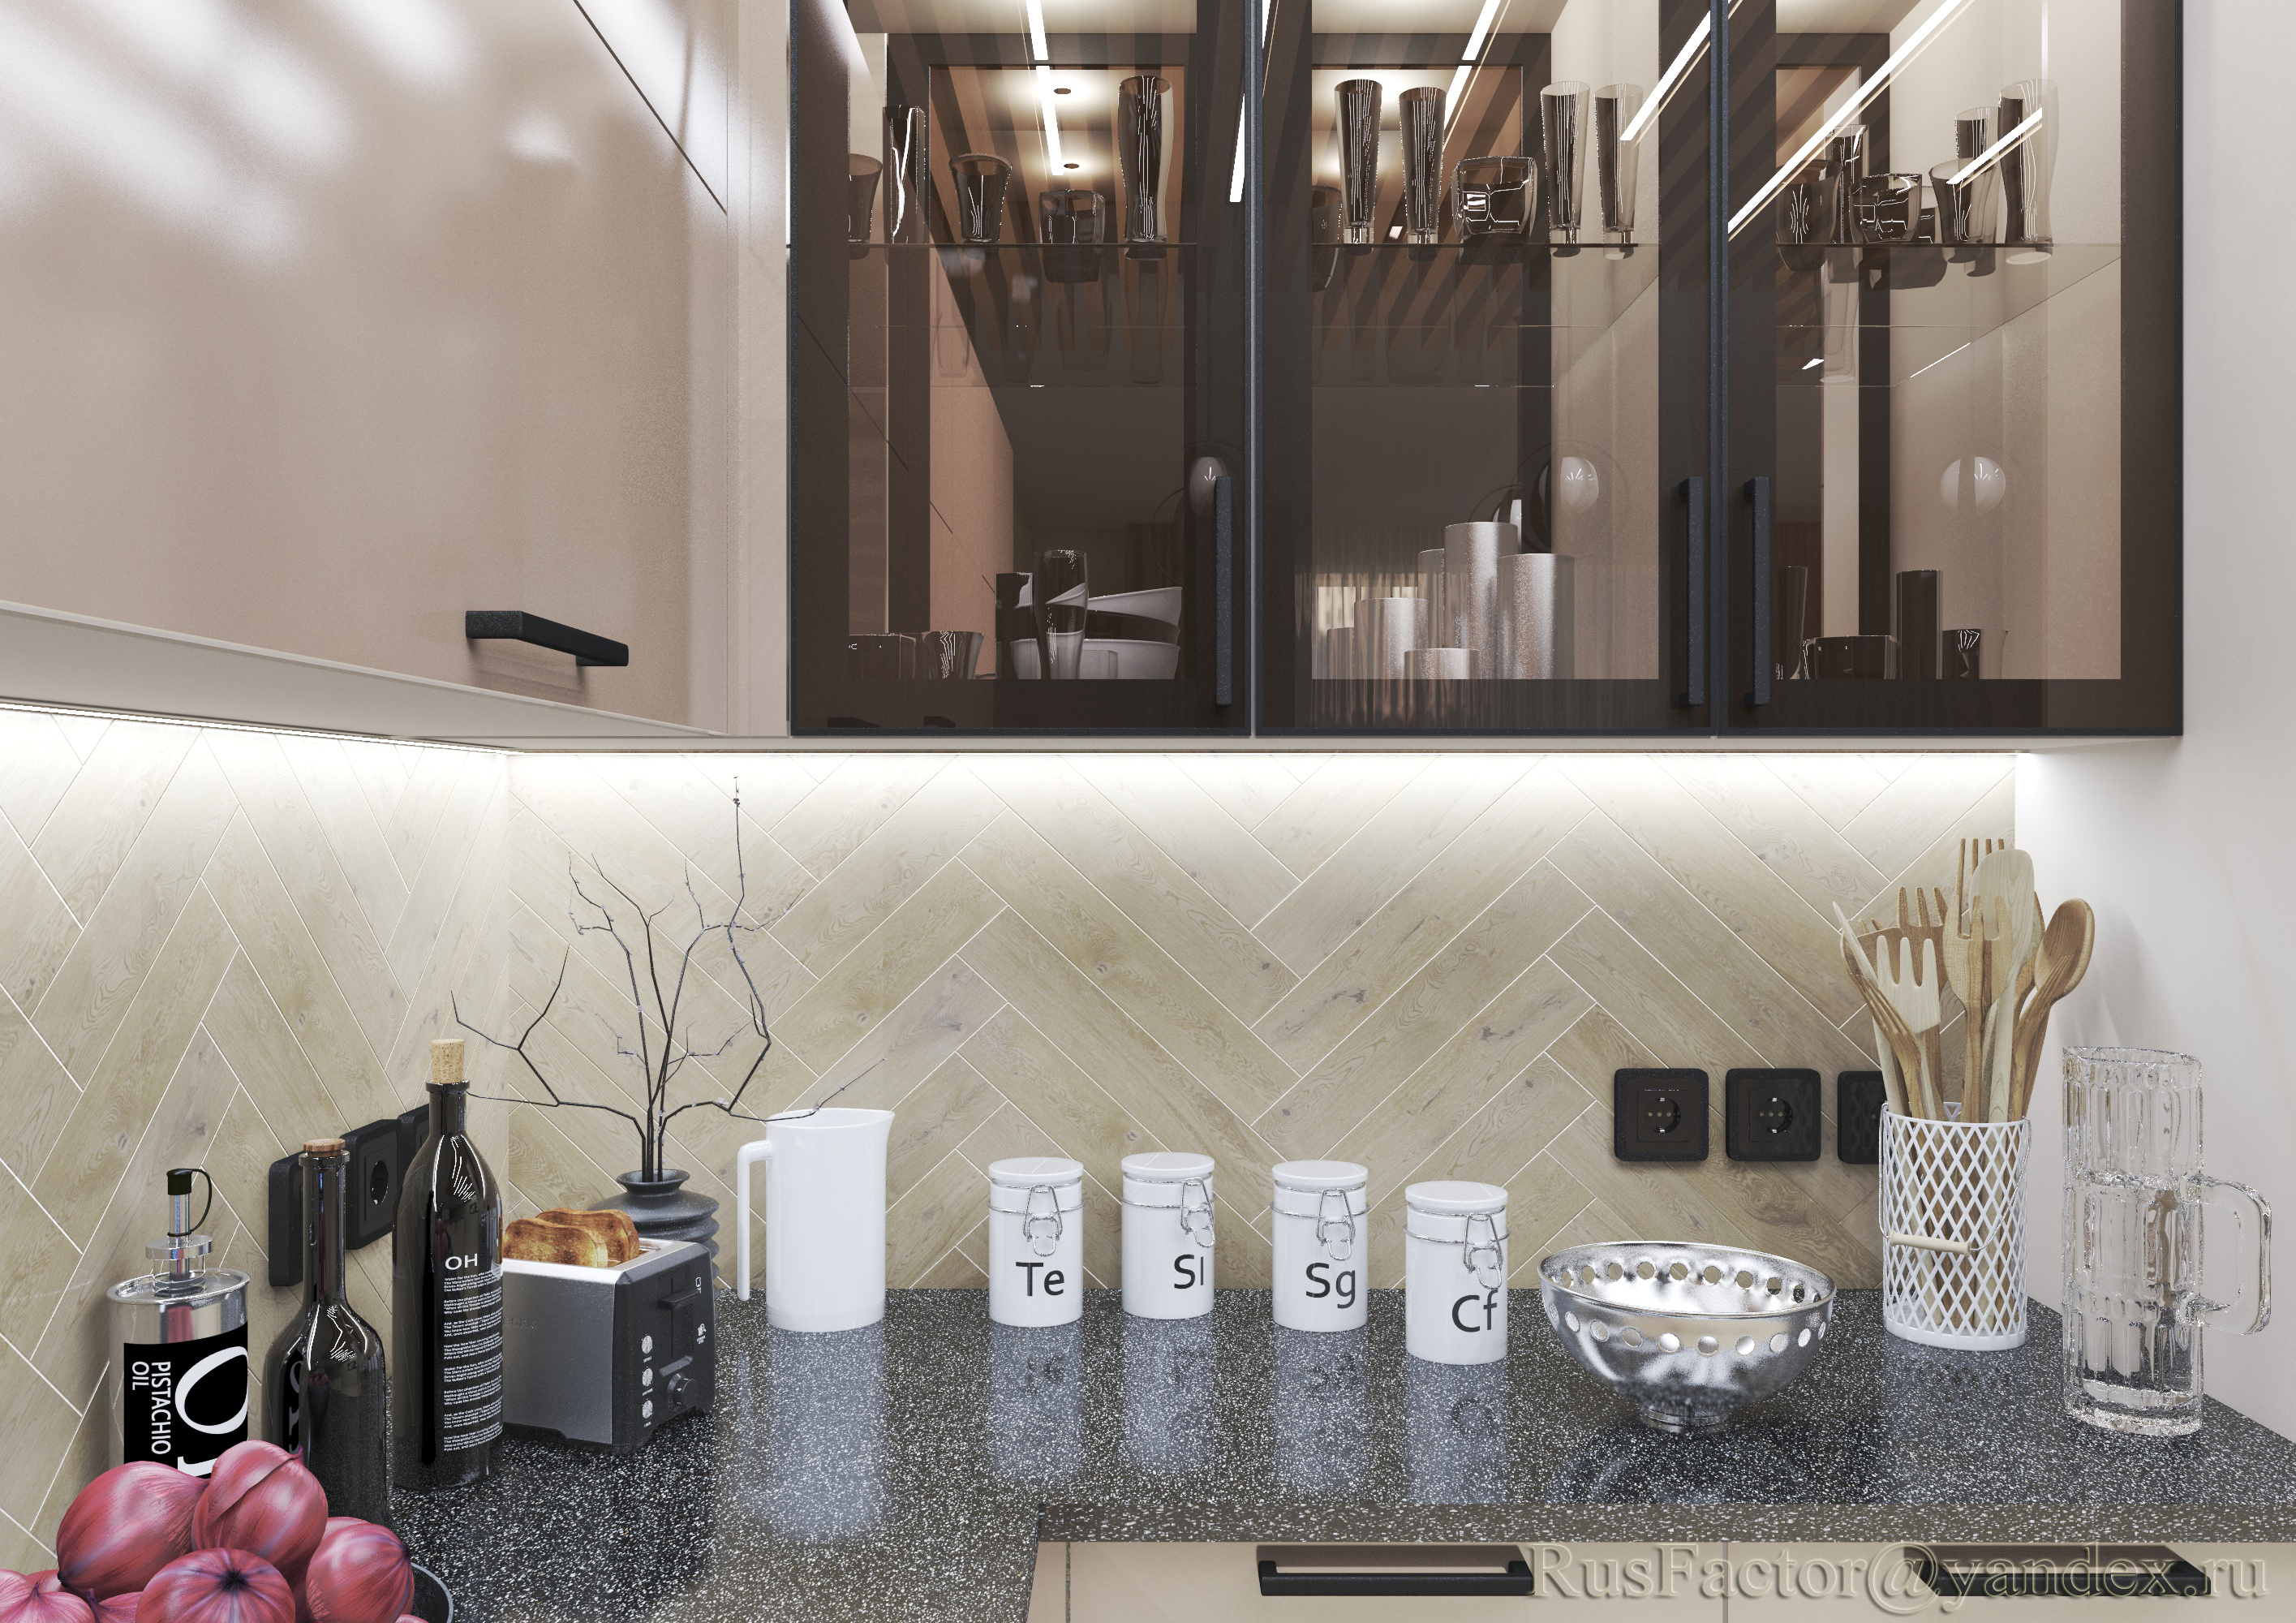 Large modern U-shaped kitchen (day and evening lighting) in 3d max vray 3.0 image